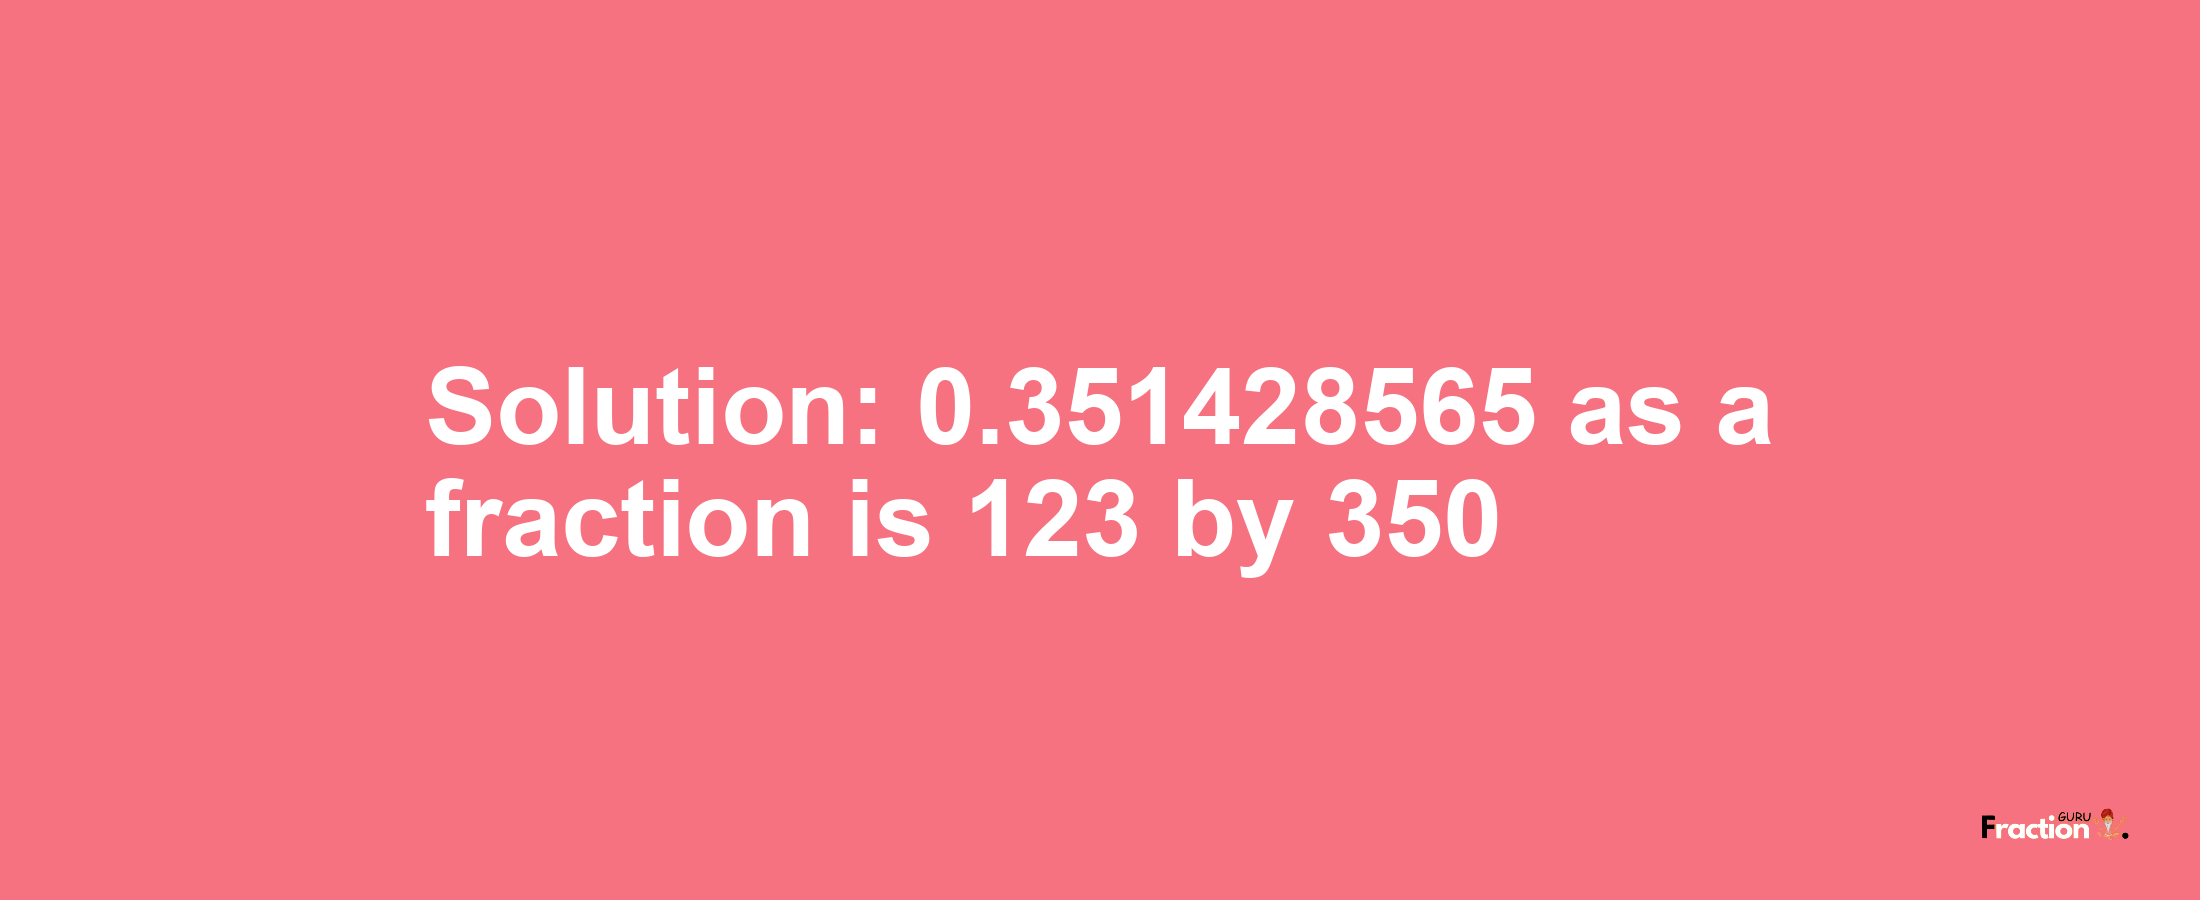 Solution:0.351428565 as a fraction is 123/350